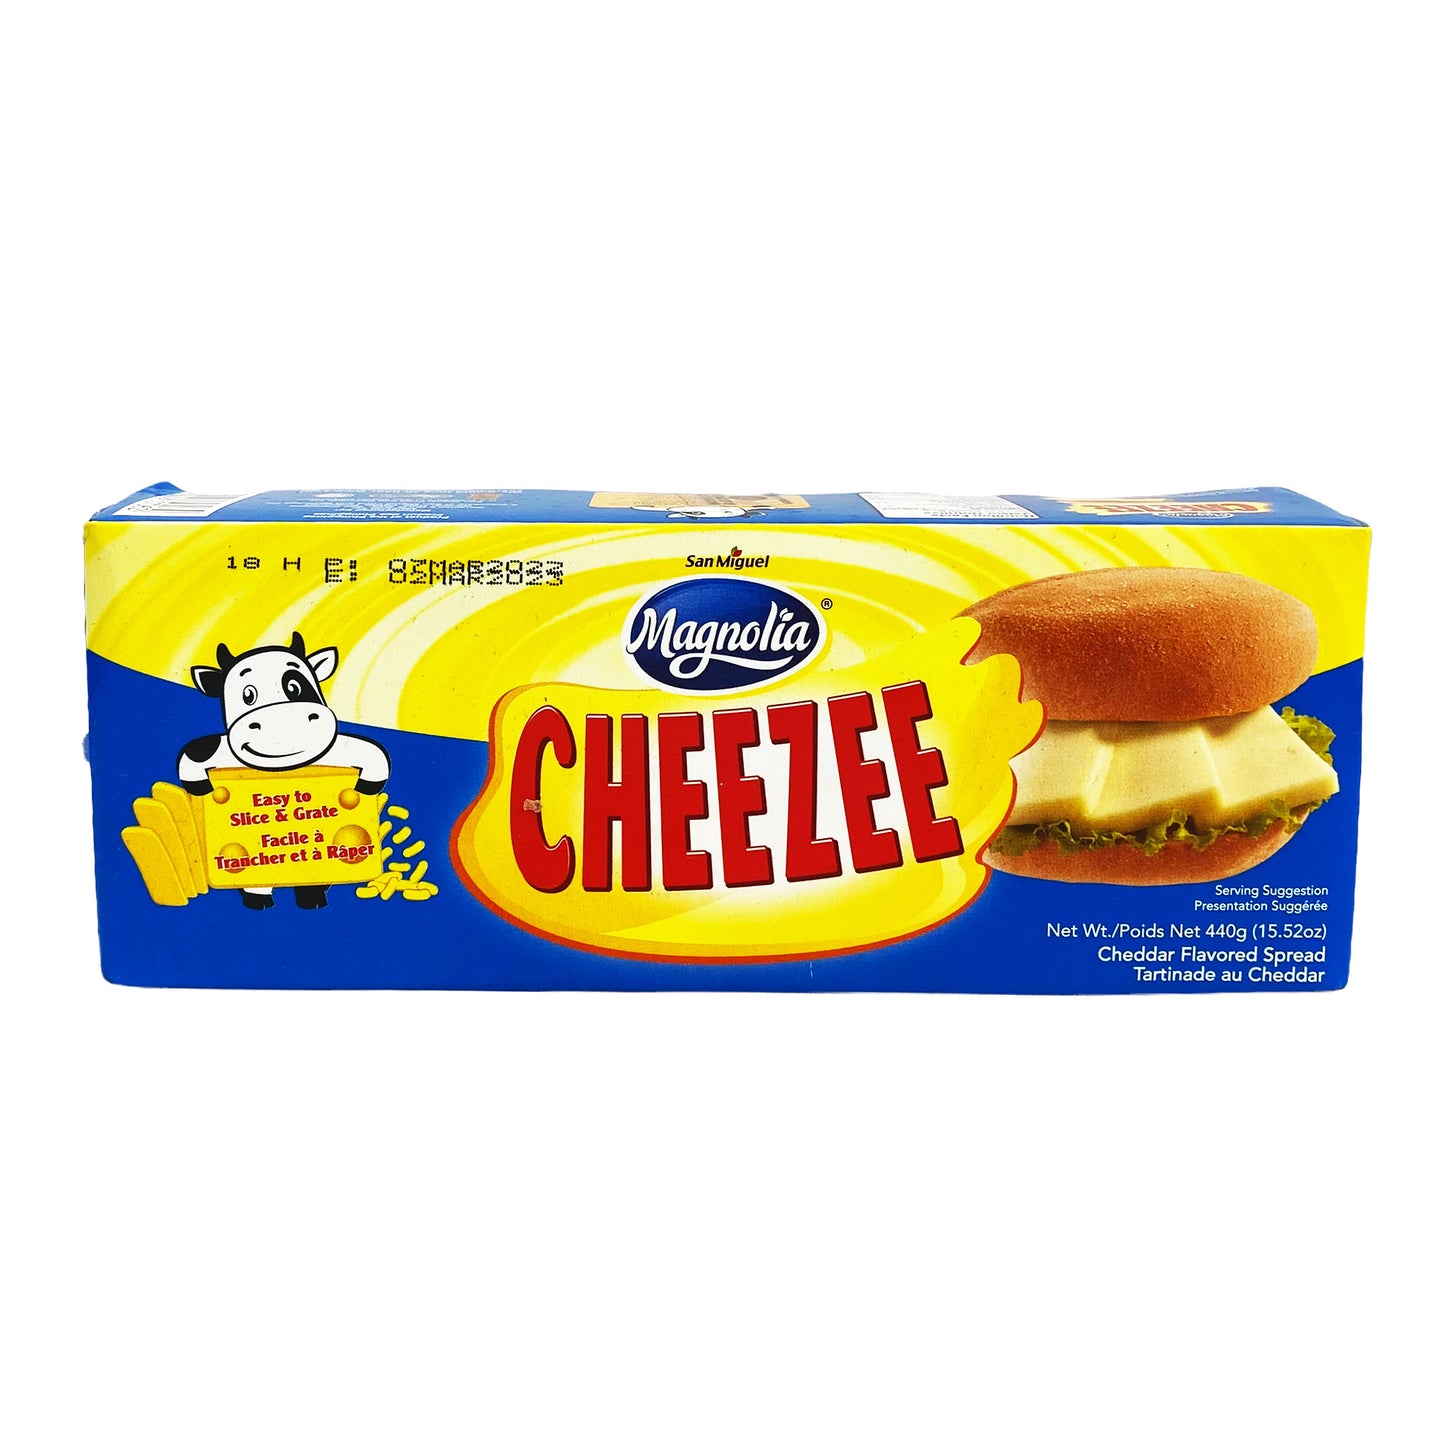 Front graphic image of Magnolia Cheezee Cheddar Flavored Spread 15.52oz (440g)